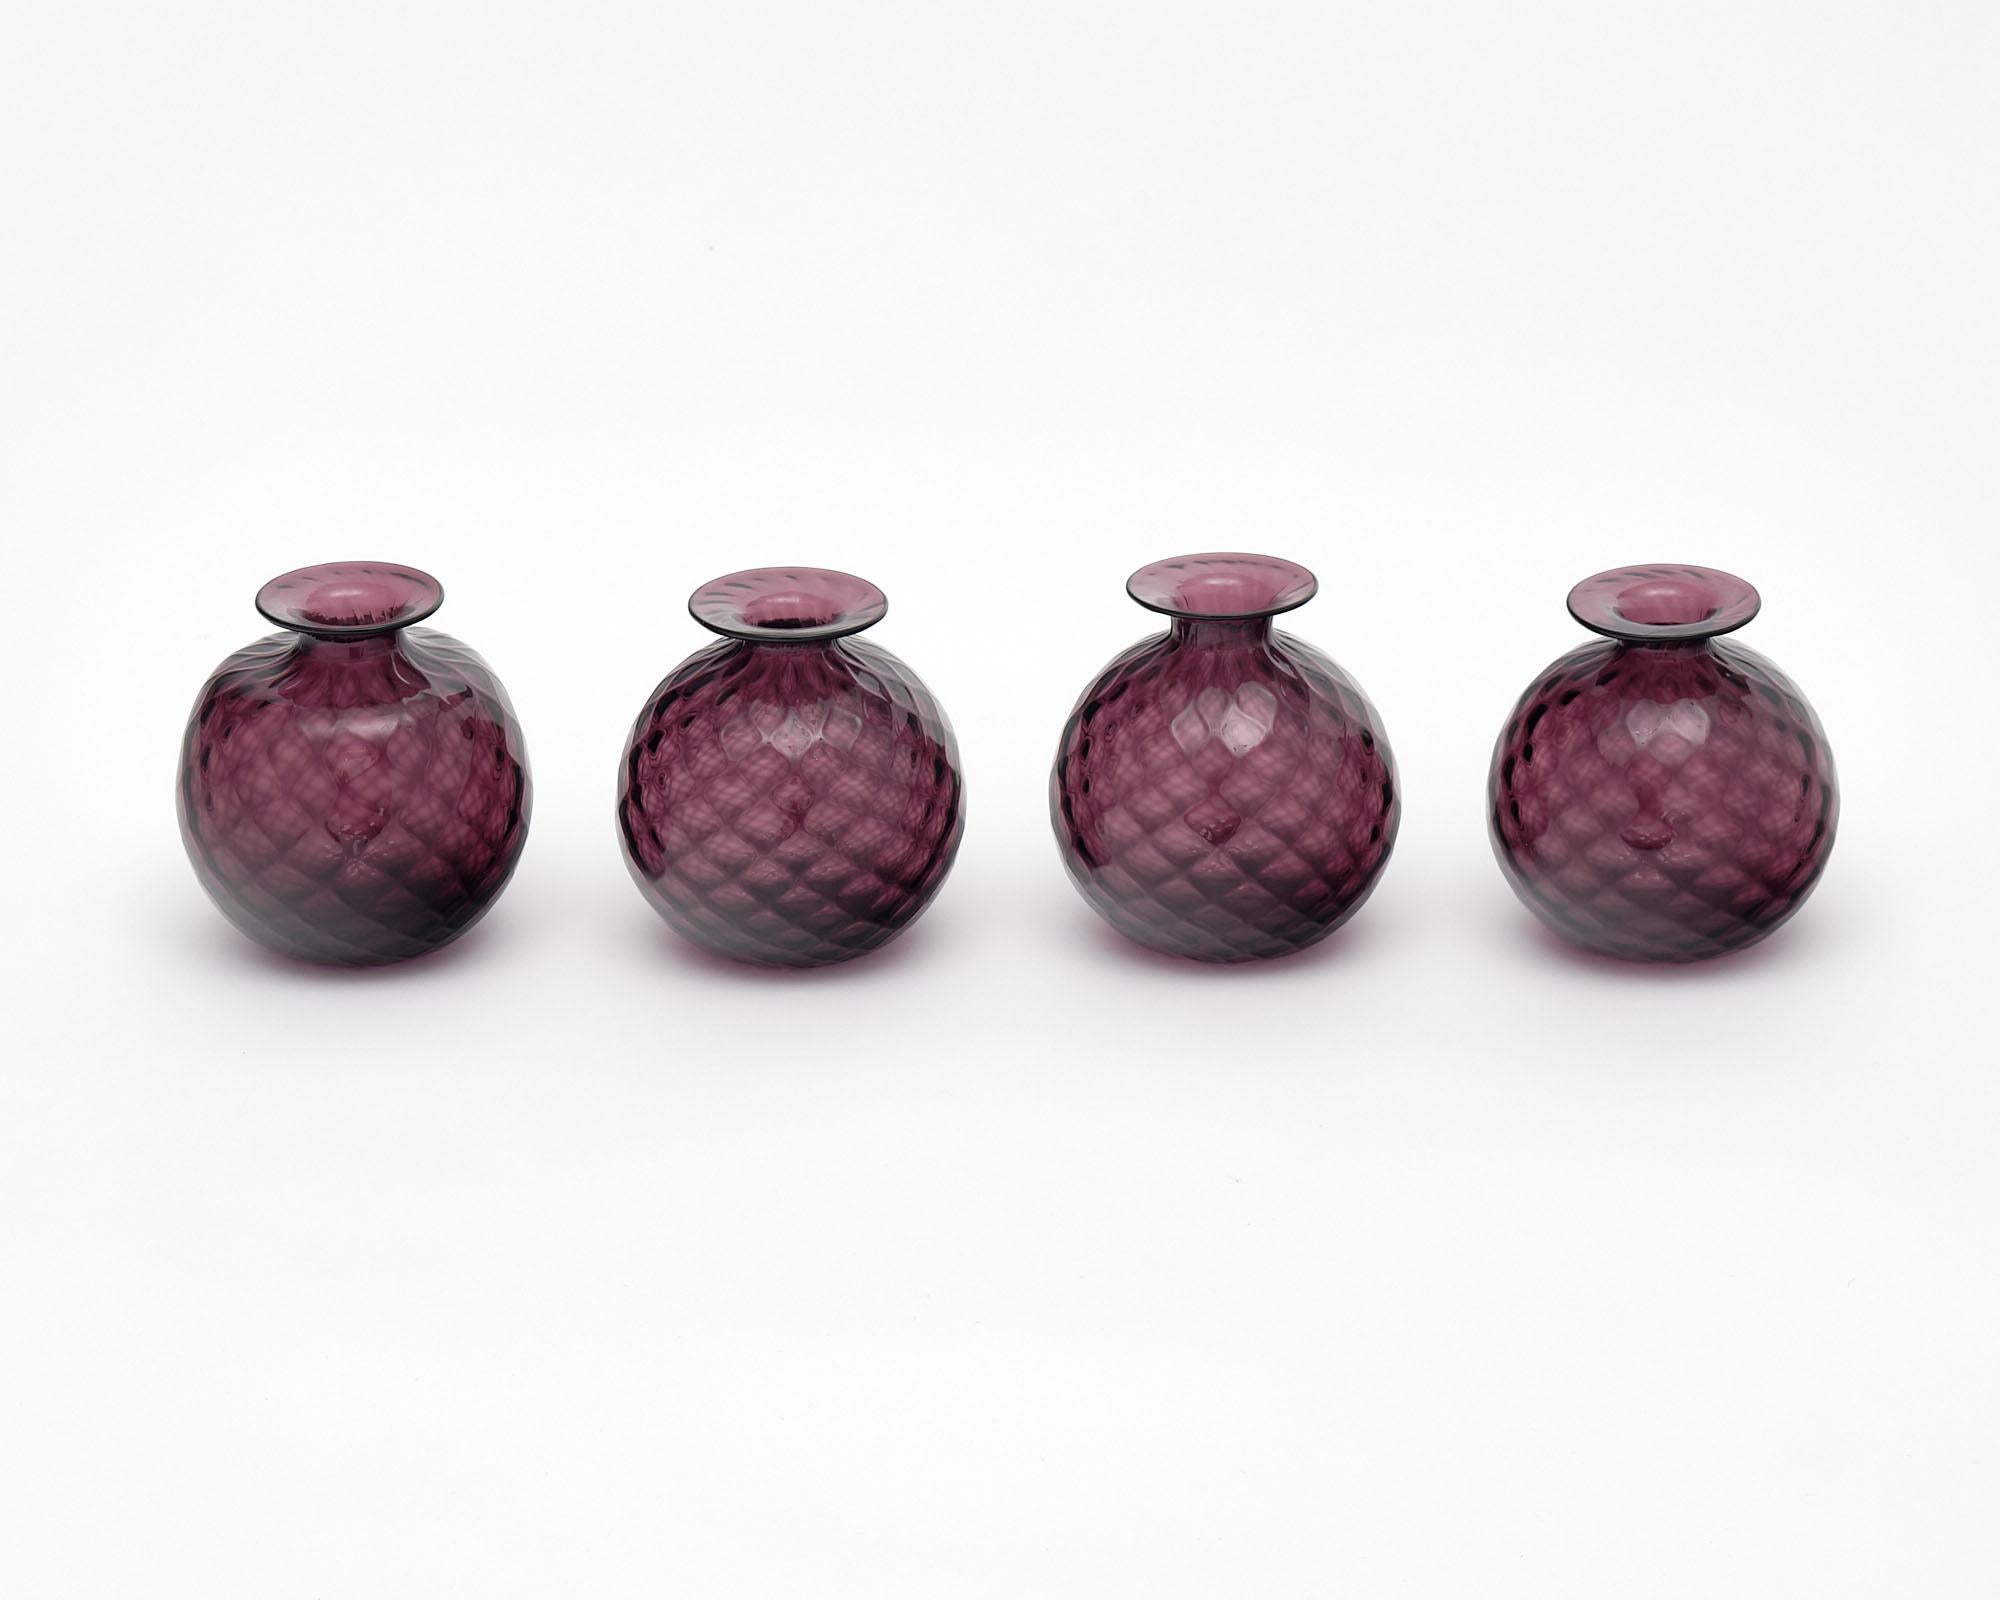 Set of 4 Murano glass bud vases. Hand blown in the 